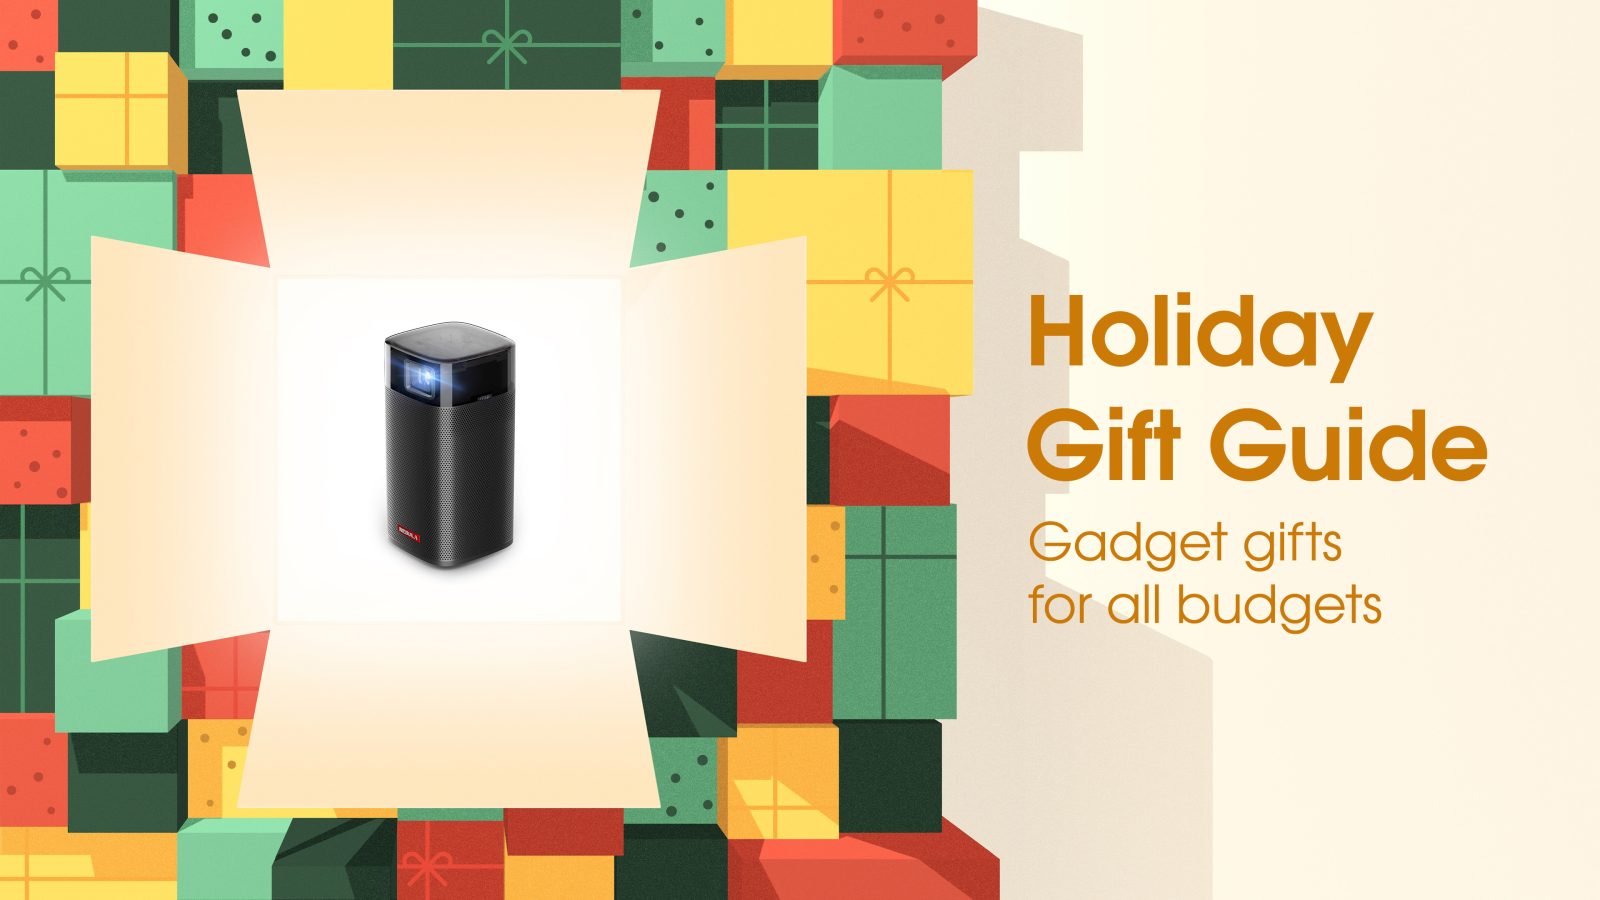 Gadget gifts